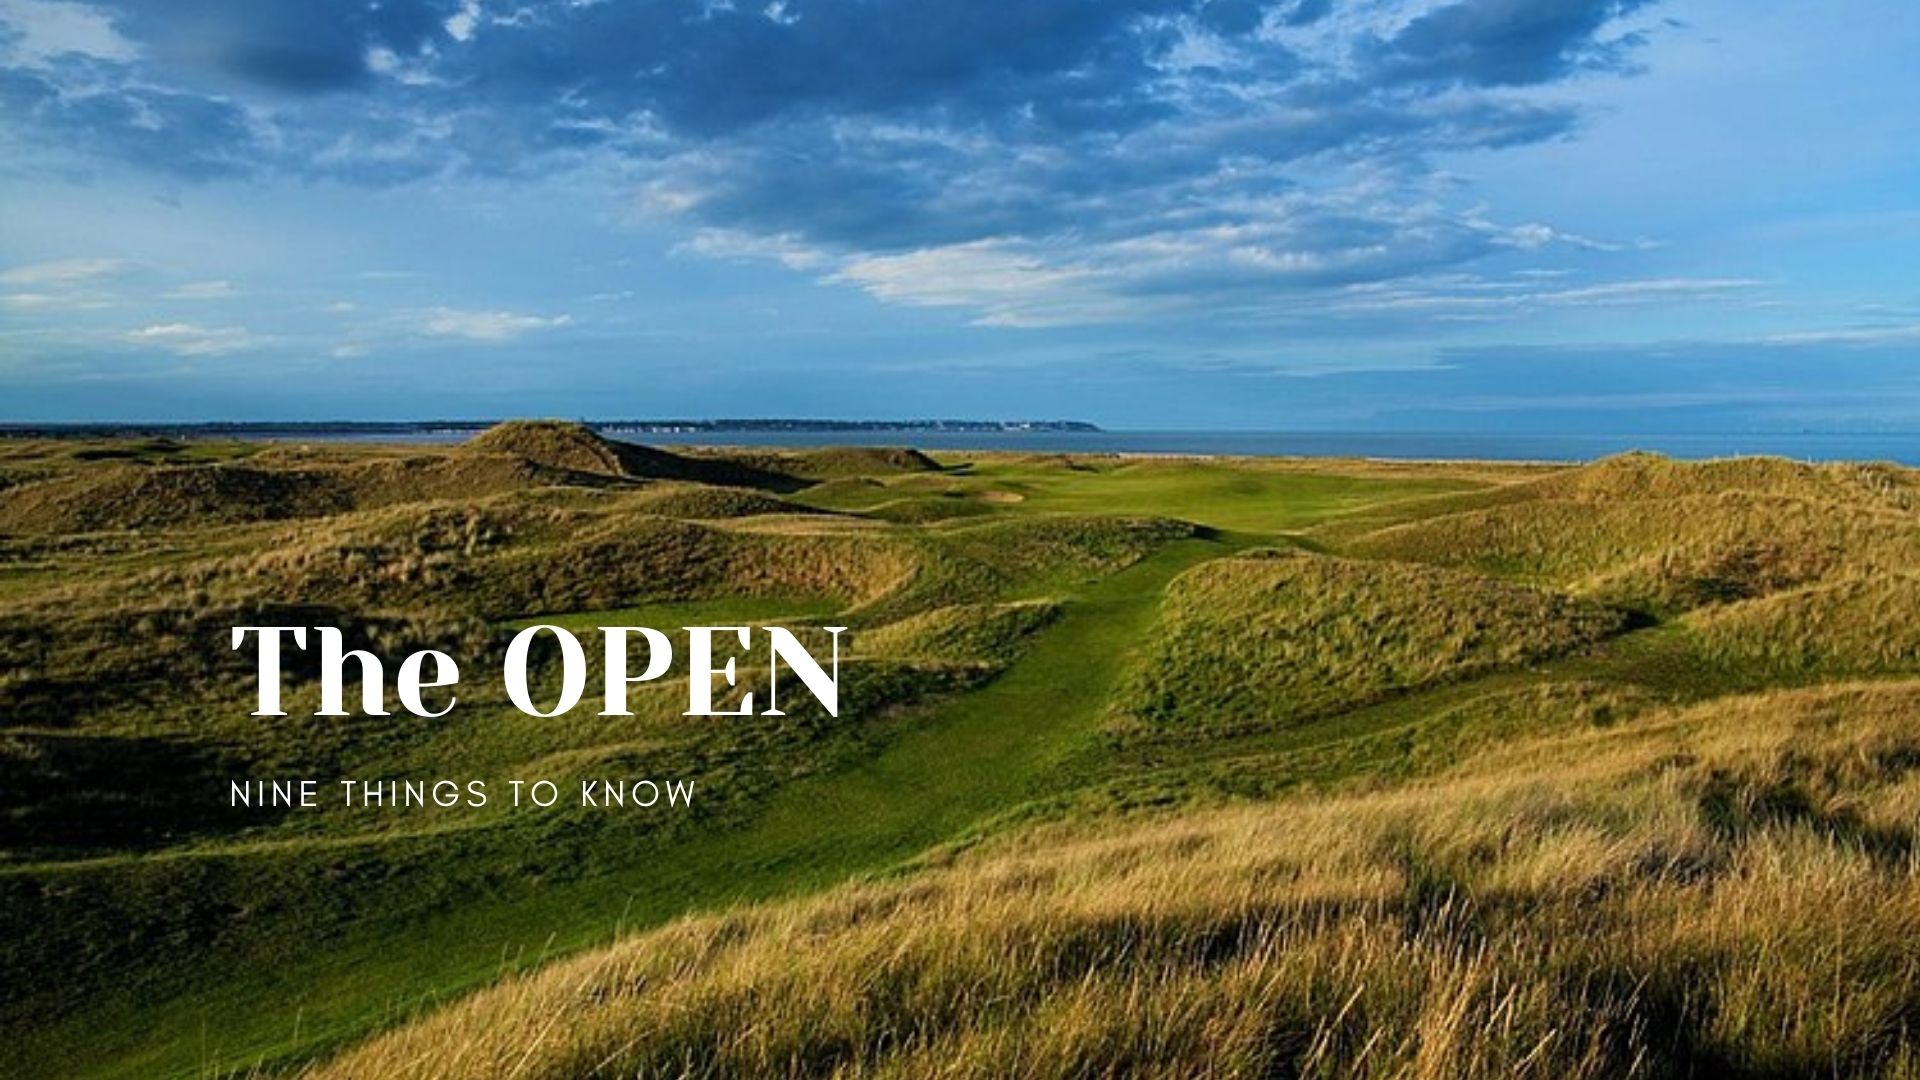 The Open Championship returns to Royal St. George’s